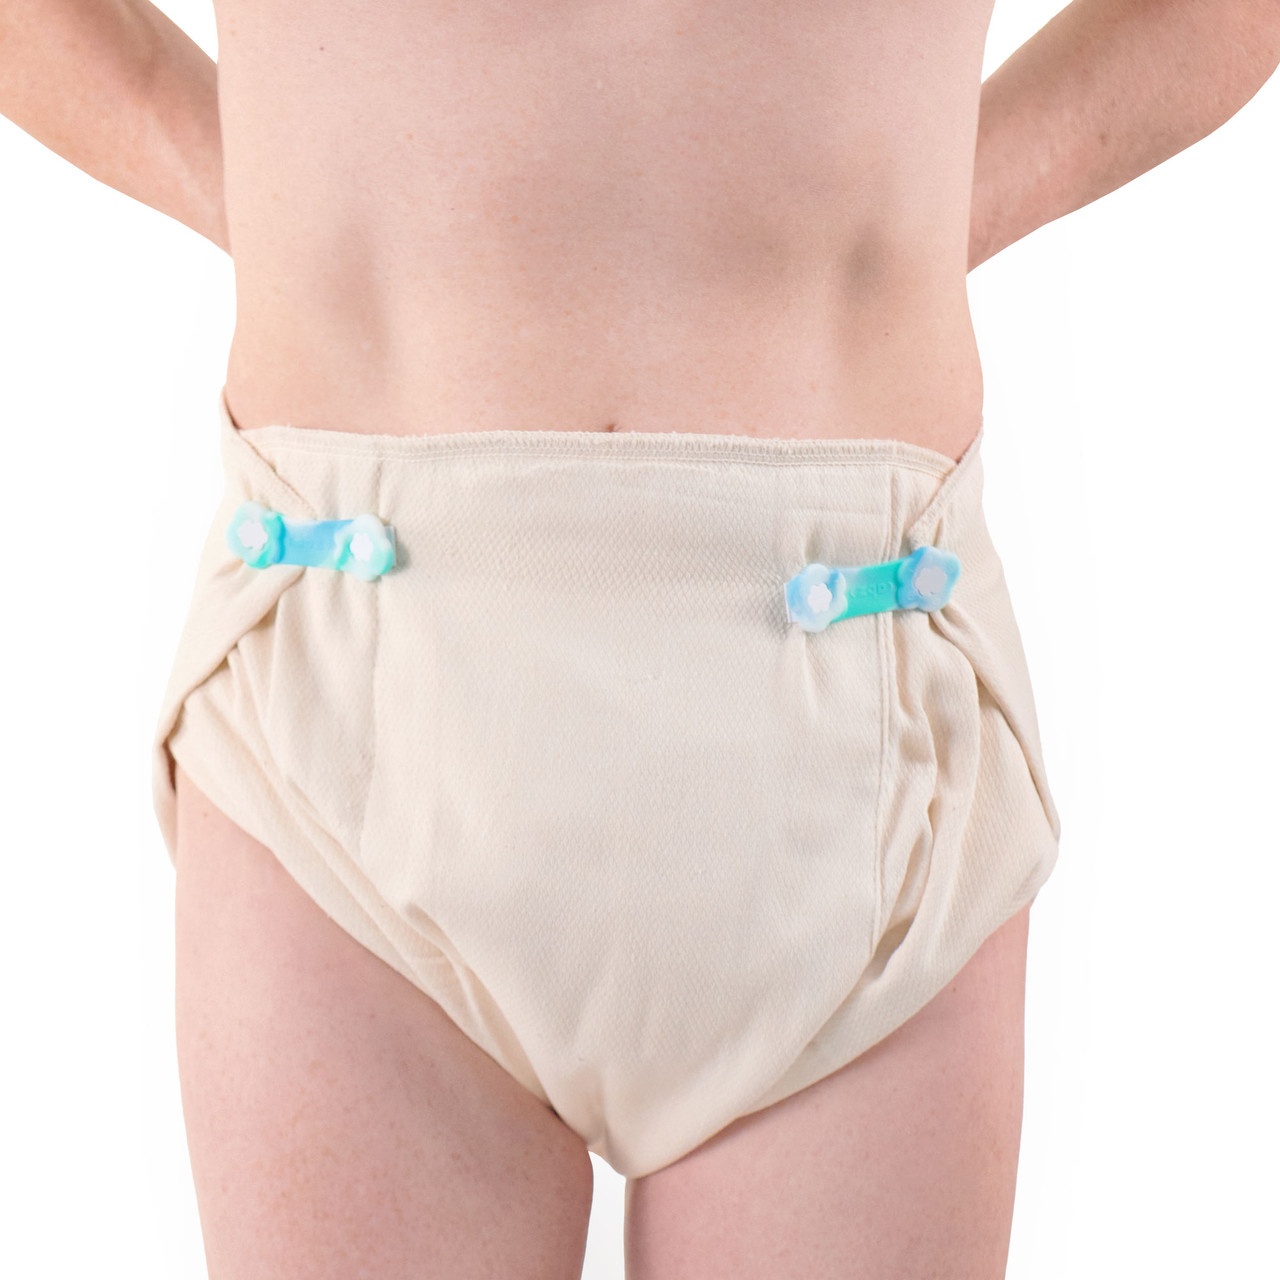 Sliding Diaper Pins - 6 Pack - Incontrol Diapers